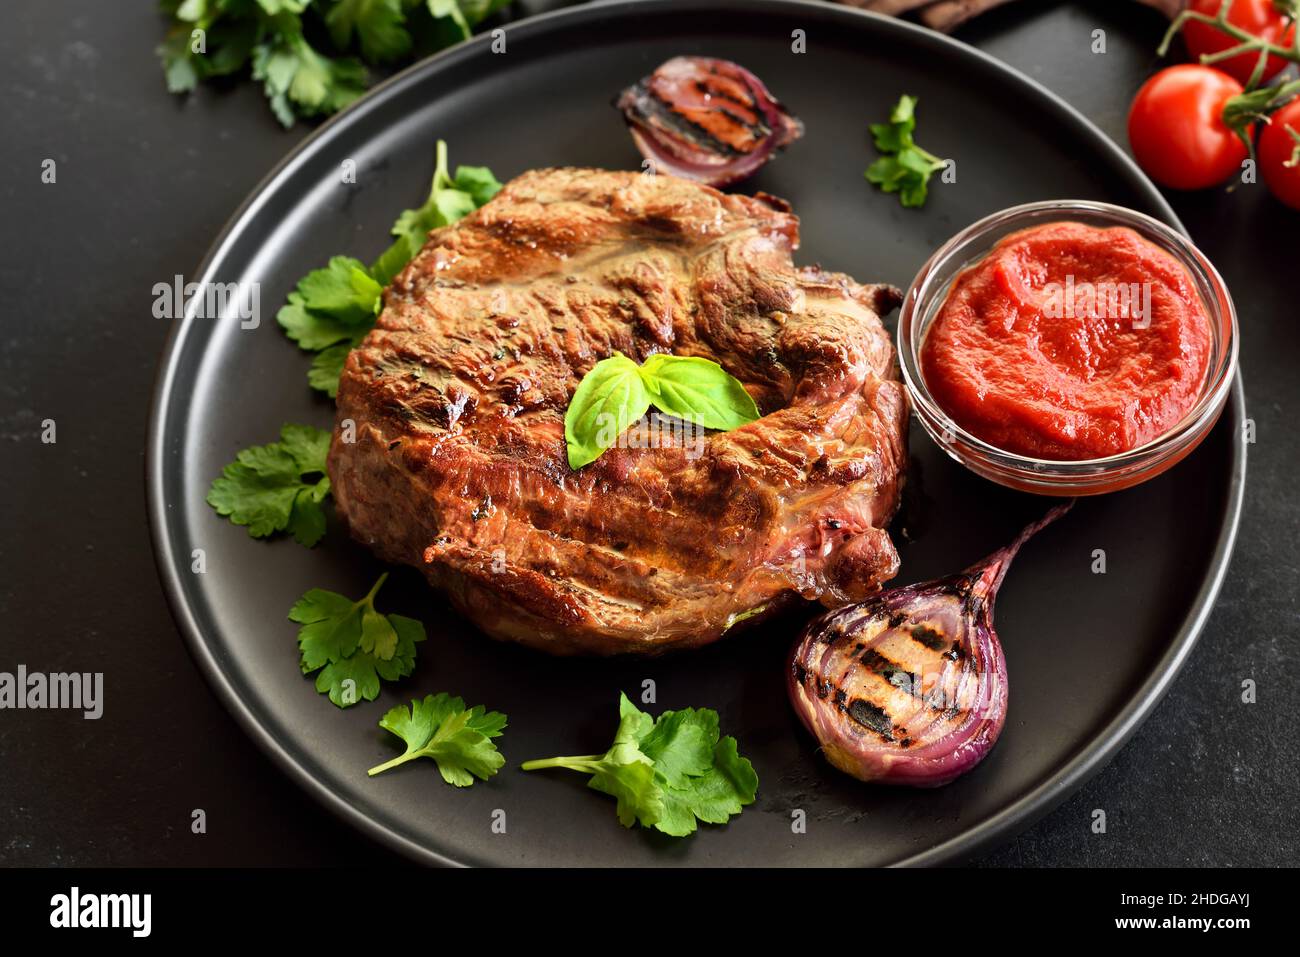 Juicy grilled beef steak and tomato sauce on plate Stock Photo